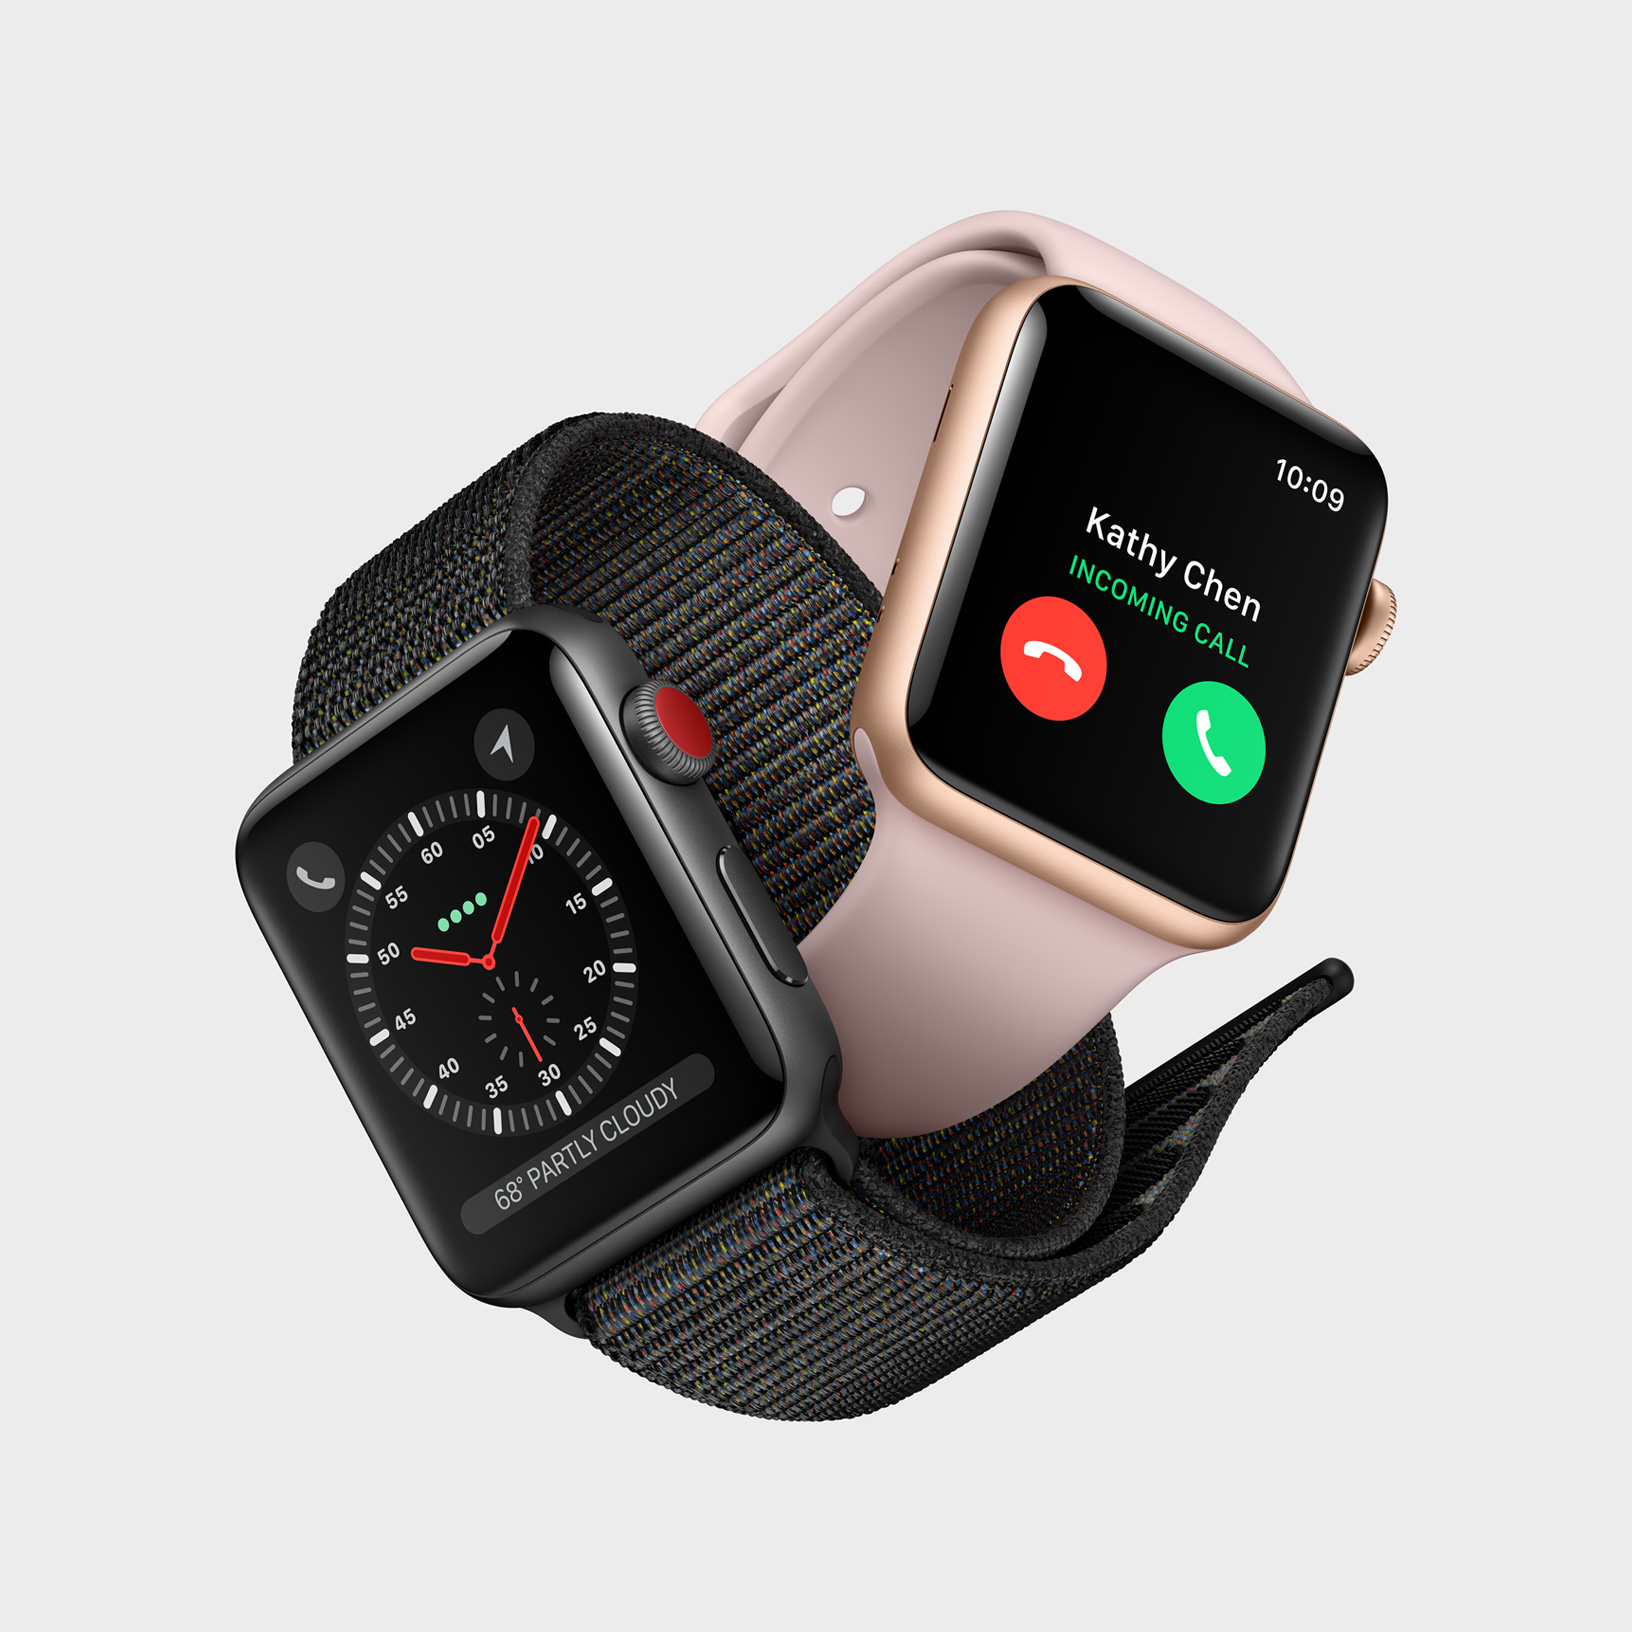 Some Apple Watch Series 3 Owners Reporting Crashes After watchOS 7 Update